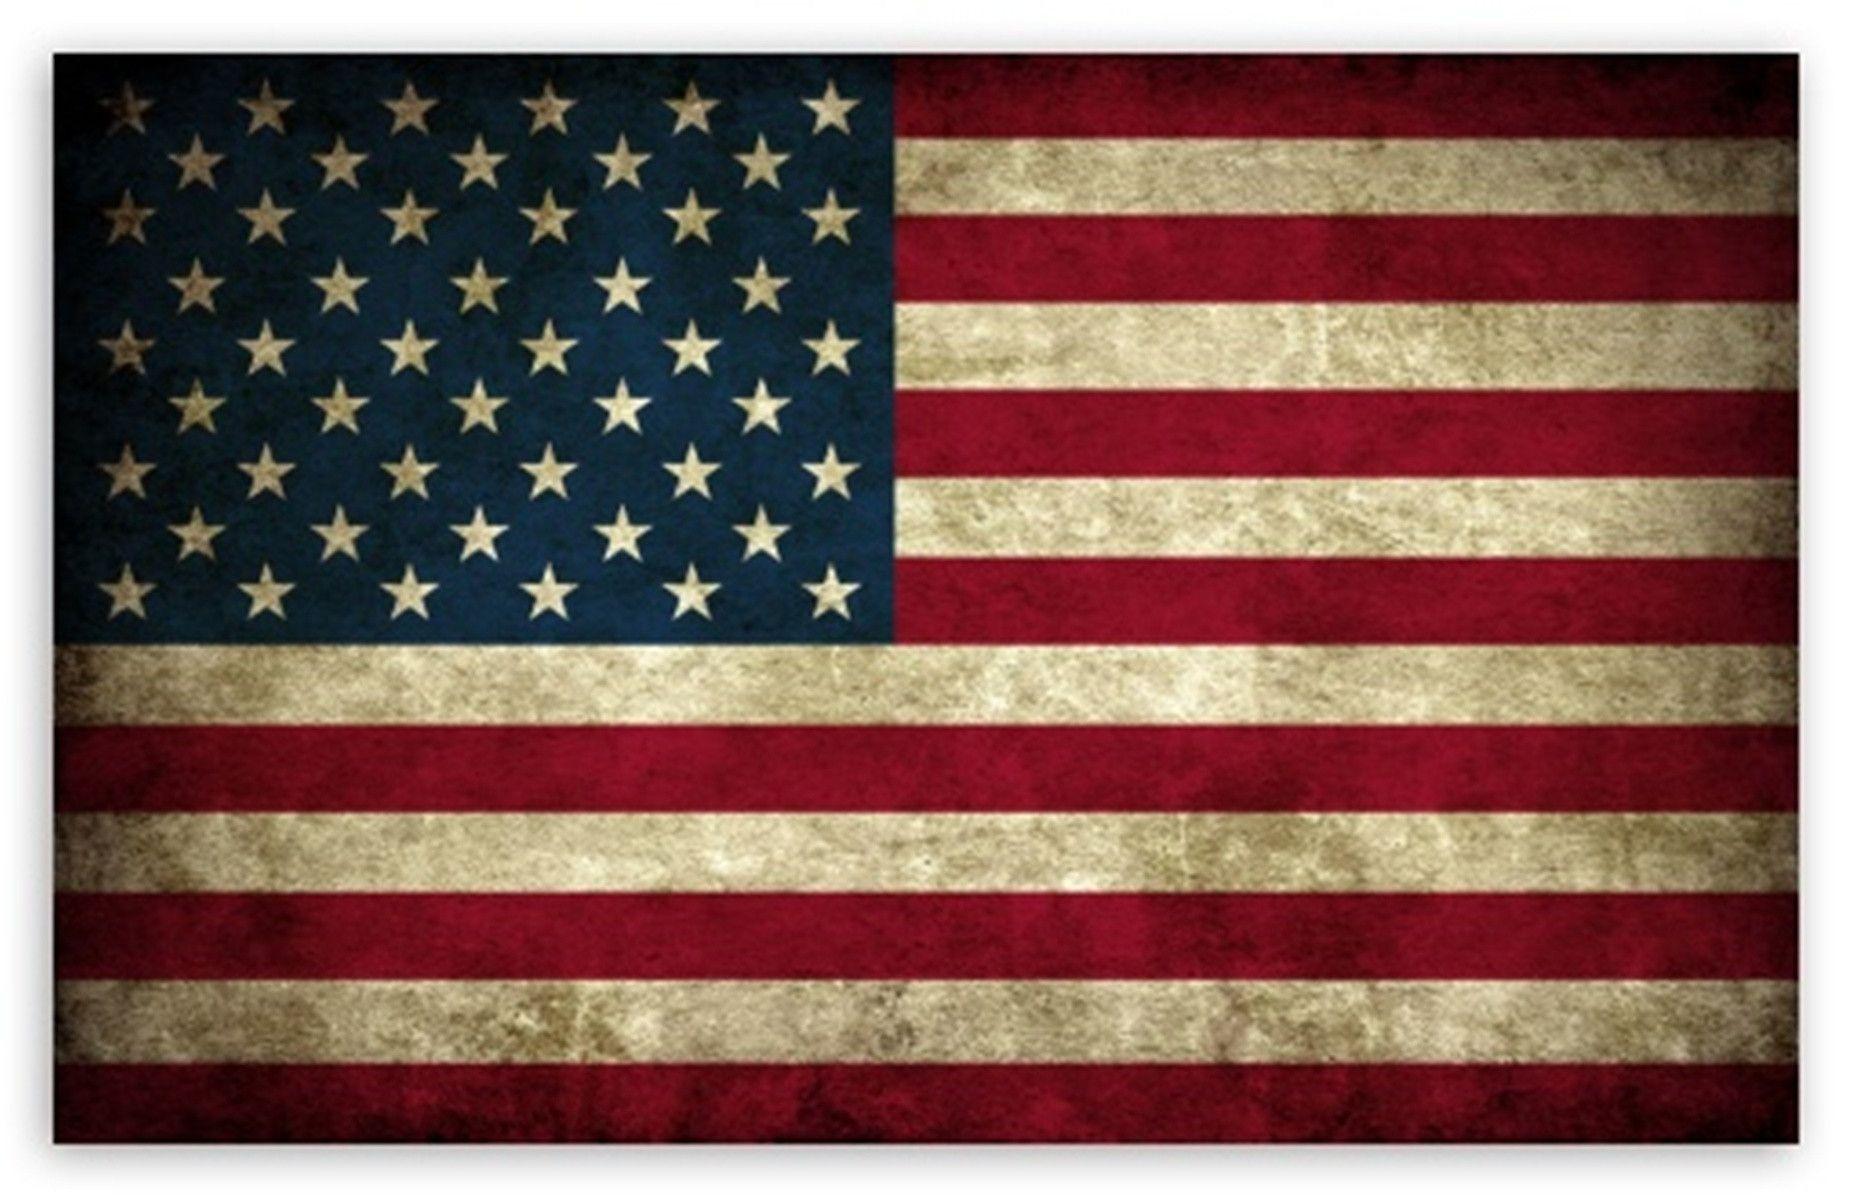 Widescreen HQ Definition Wallpaper of America Flag for Windows